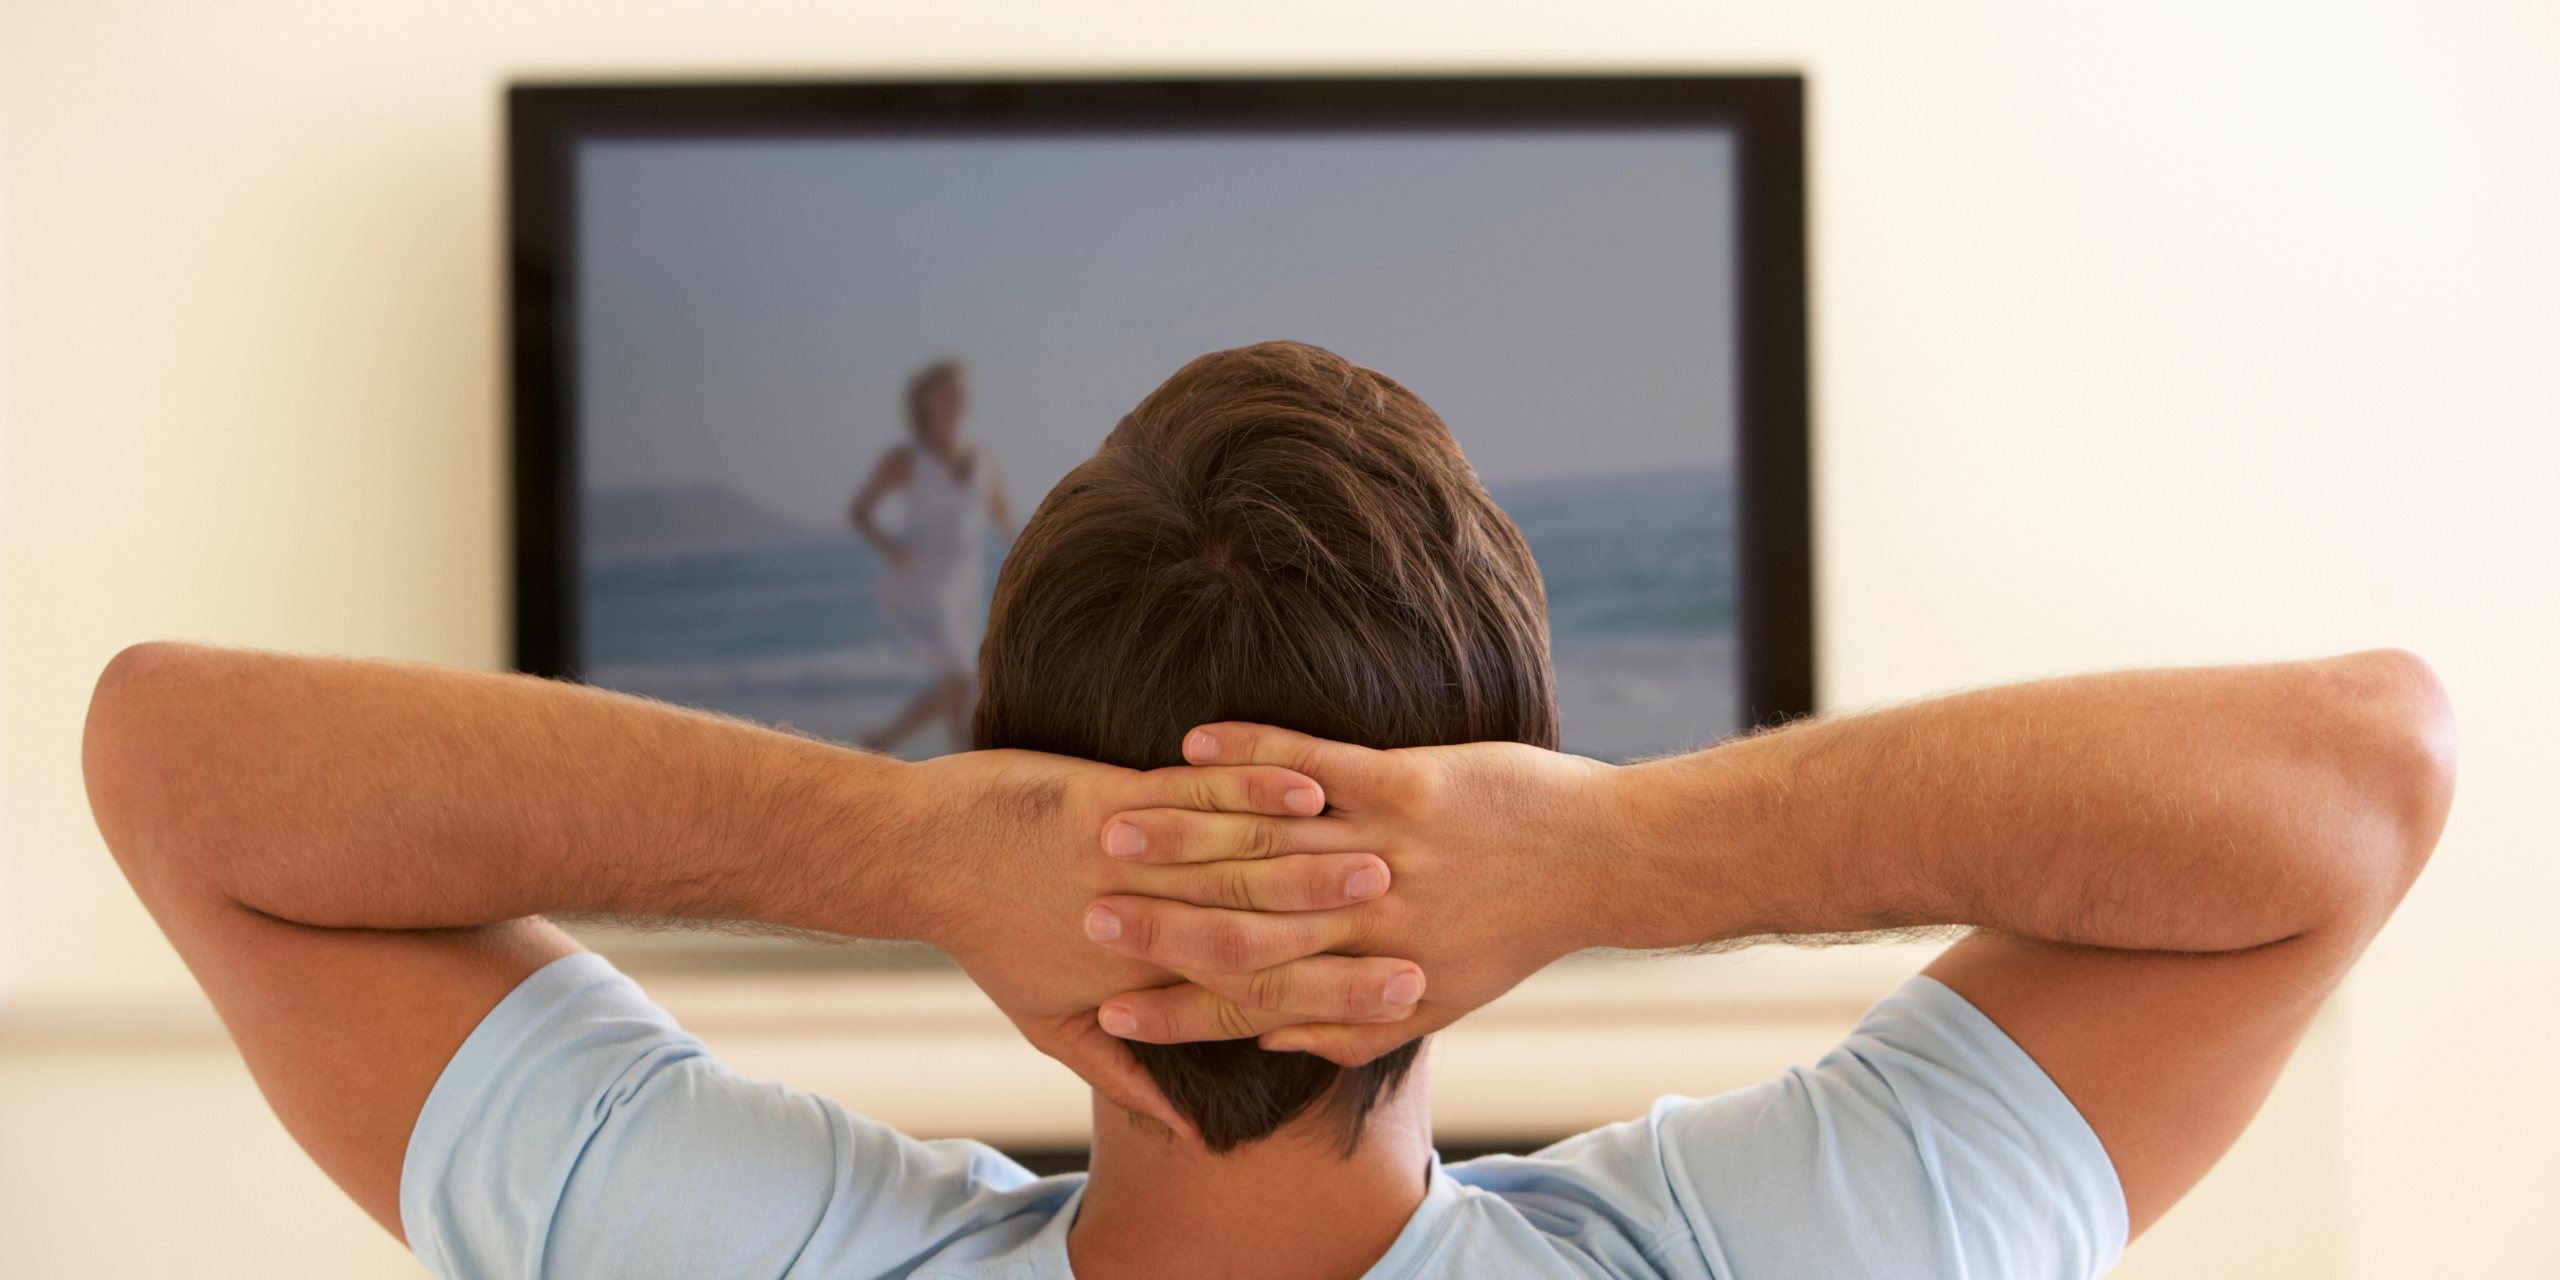 Choosing Your Connected TV Partner